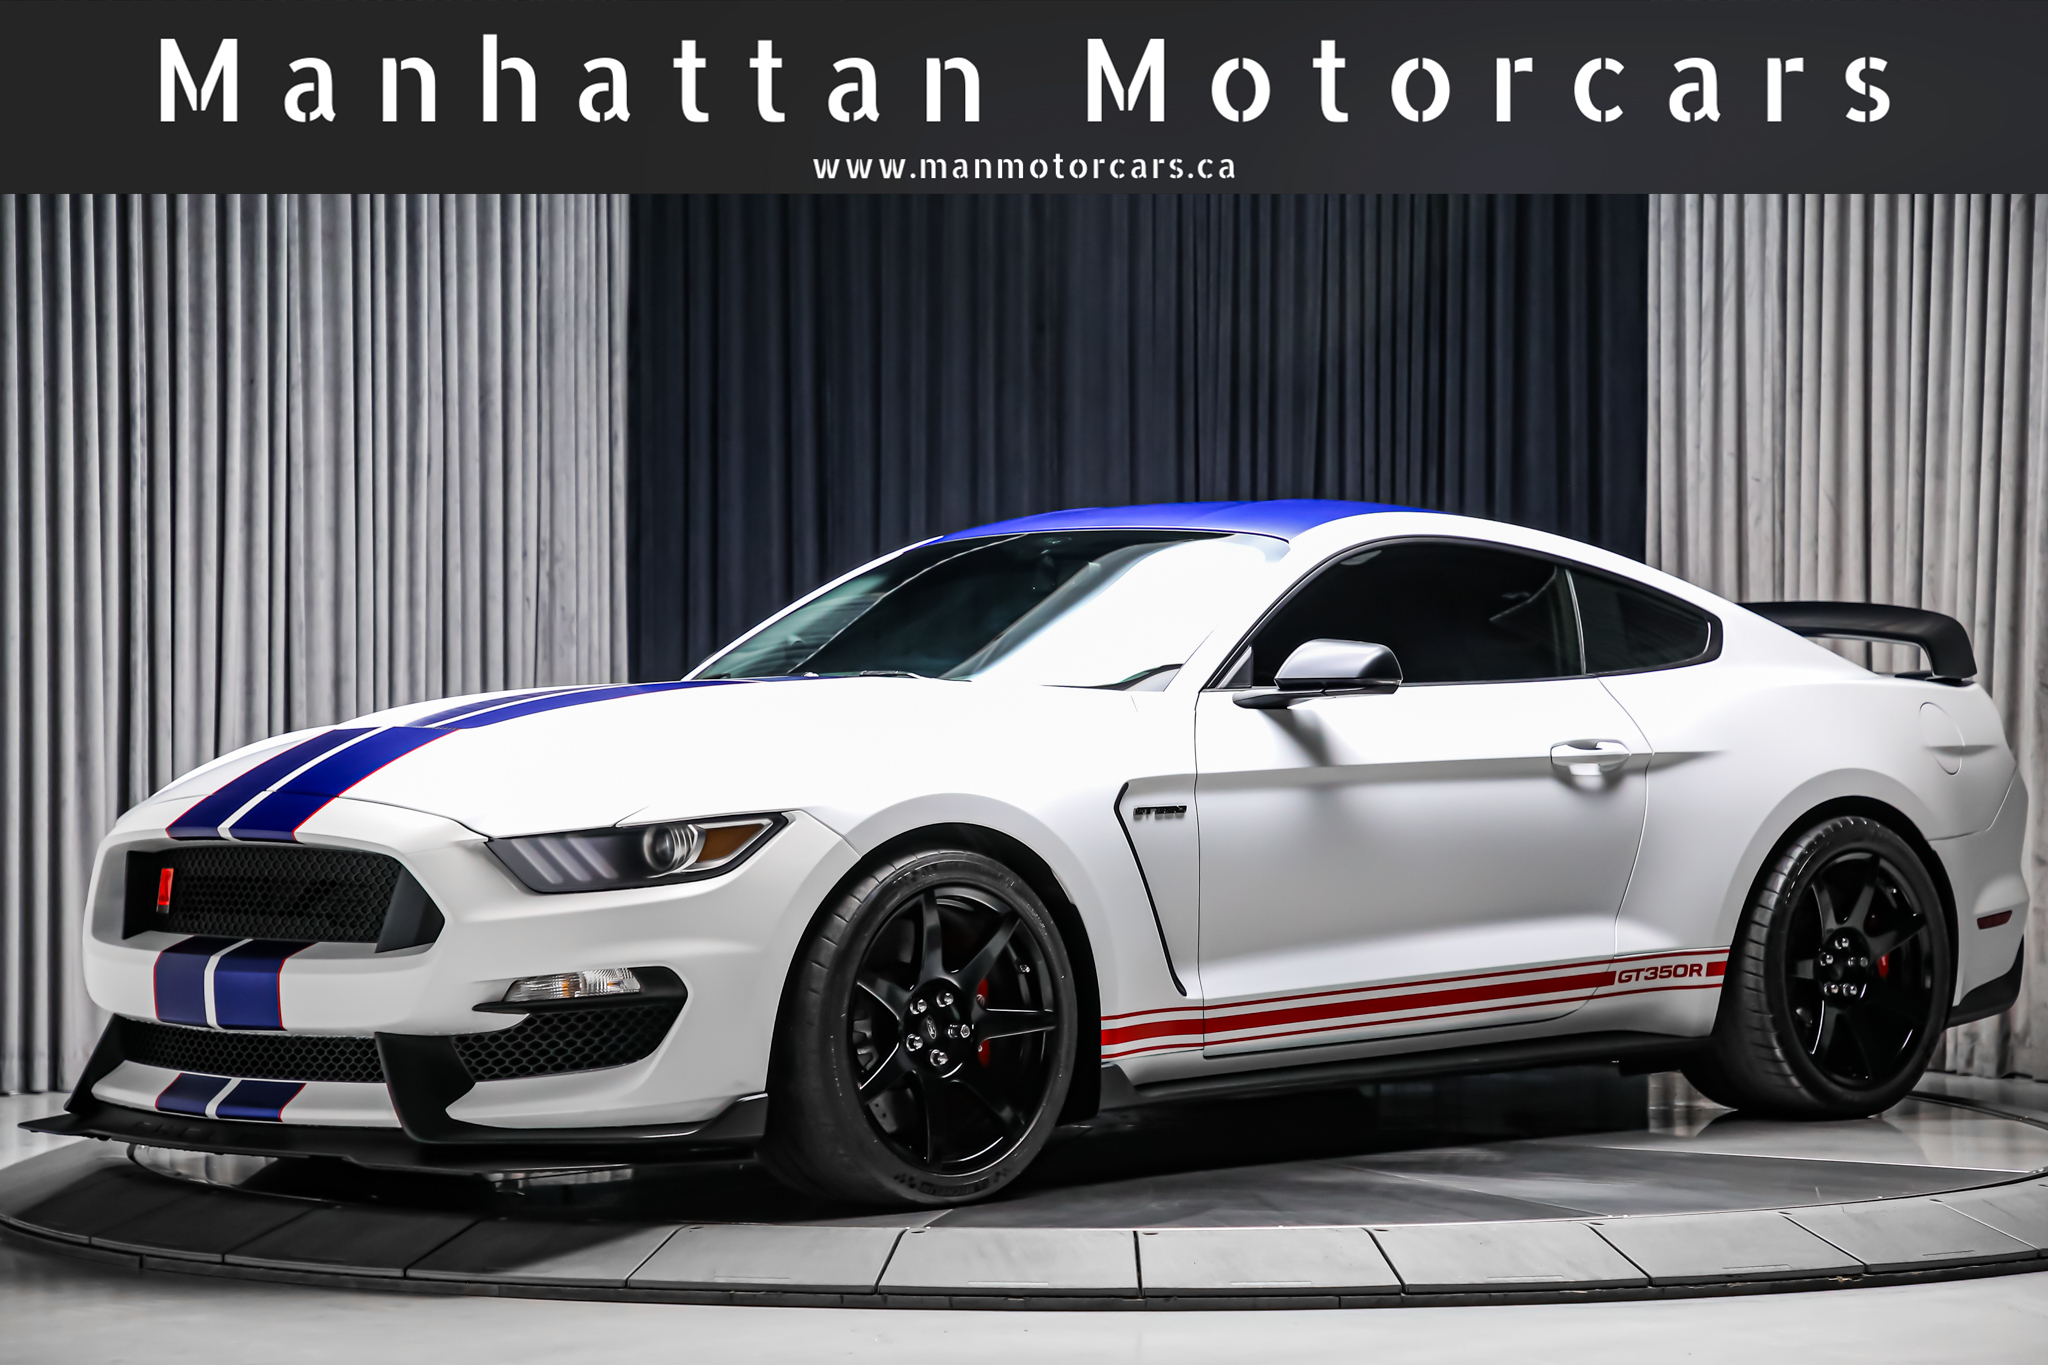 2016 Ford Mustang SHELBY GT350R 5.2L V8 |CARBONRIMS|ONLY2,600KM!|PPF